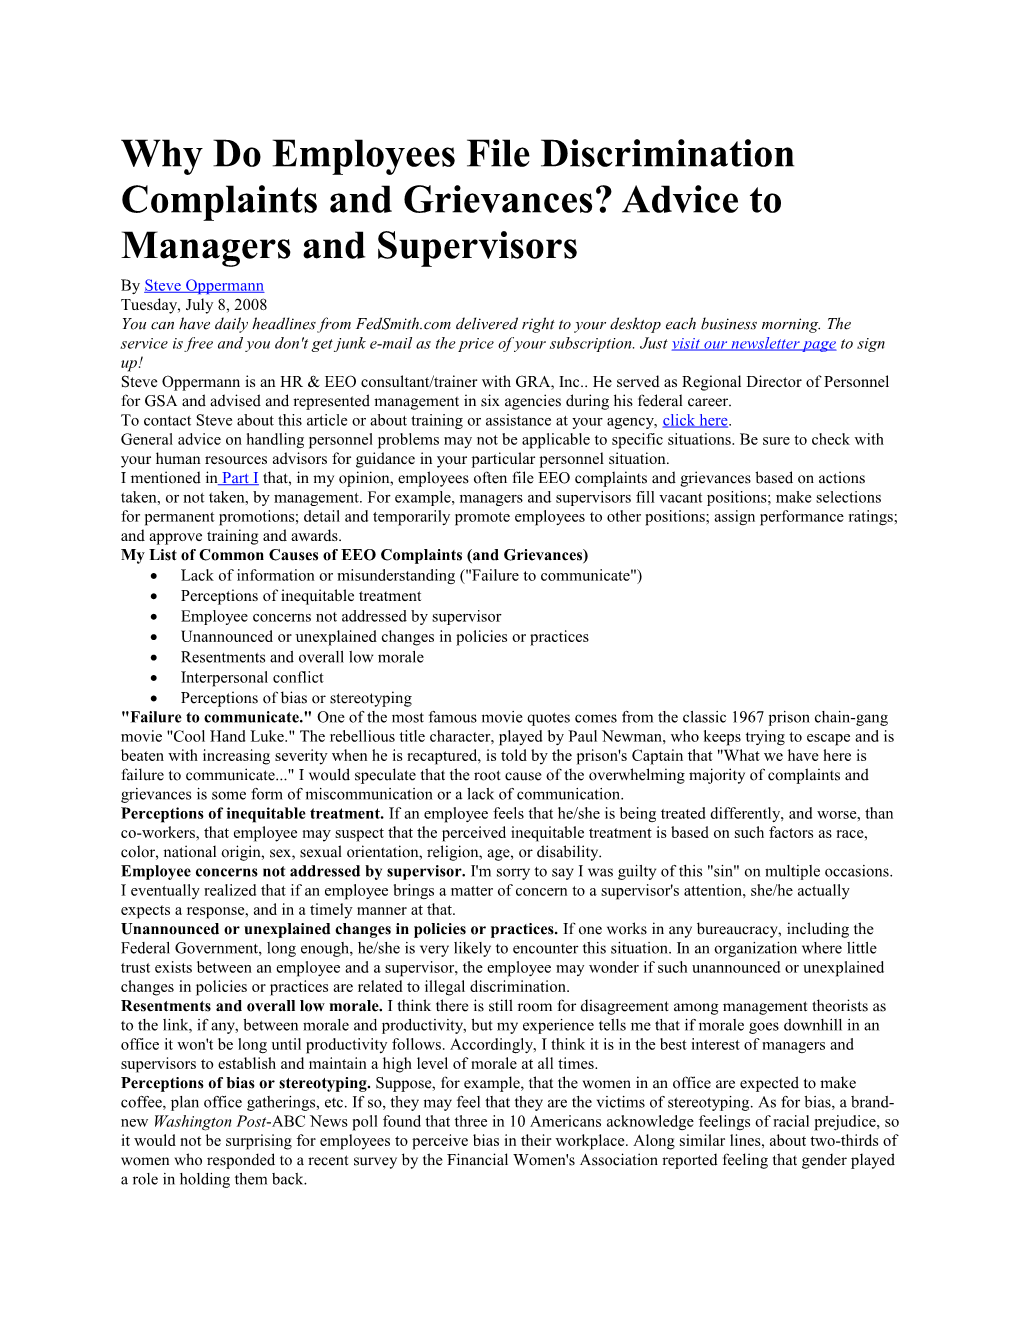 Why Do Employees File Discrimination Complaints and Grievances? Advice to Managers And